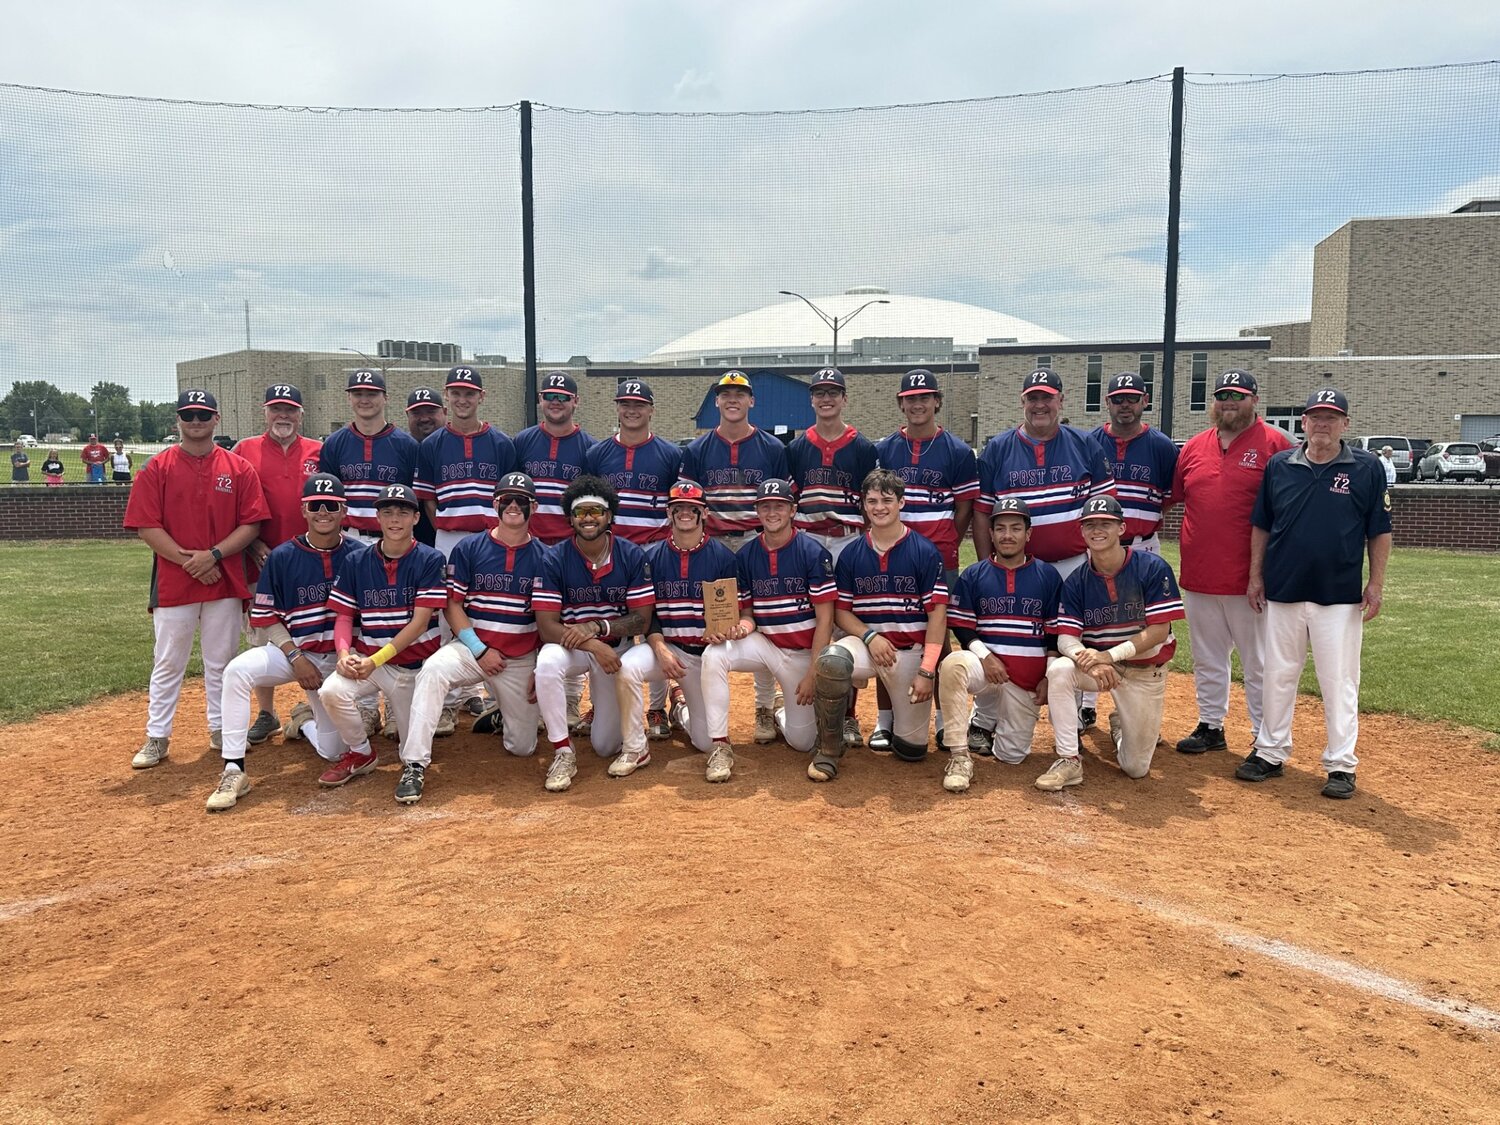 American Legion Byron Cox Post 72 baseball is headed back to the state tournament after winning the 
Regional title this past weekend. Post 72 will play South Haven on Friday at 5 p.m. in Terre Haute.